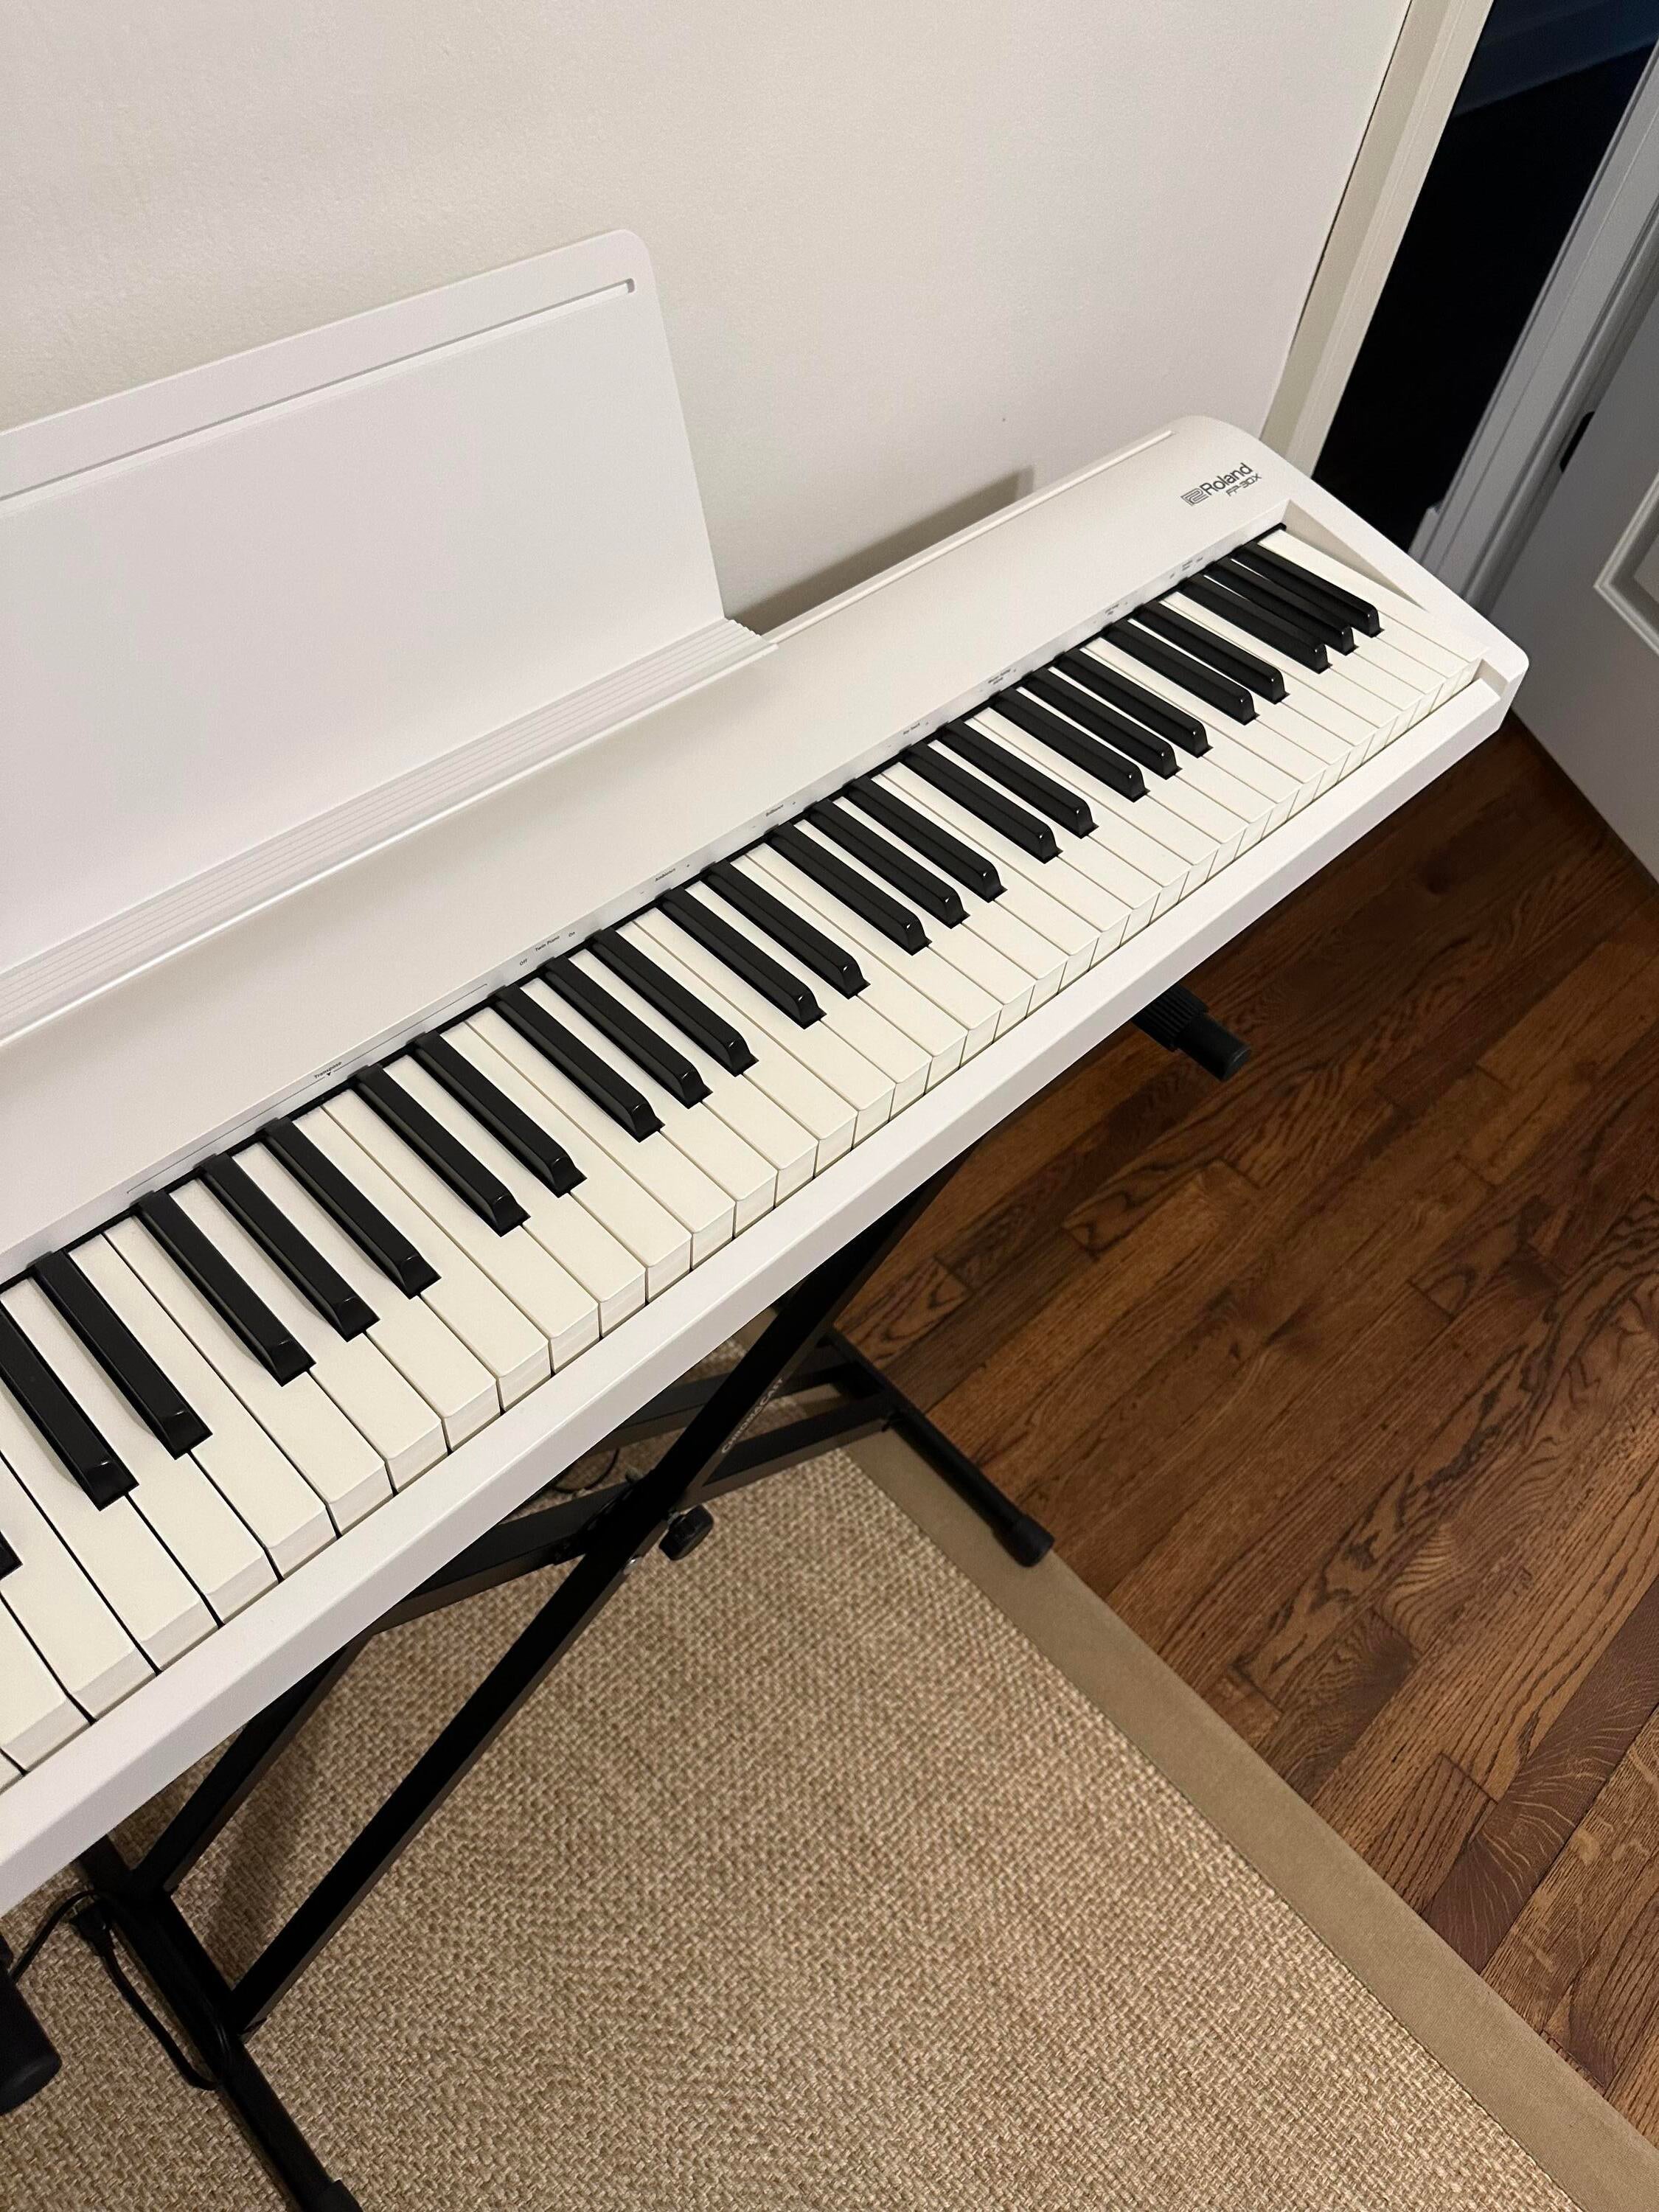 Used Roland FP-30X Digital Piano with - Sweetwater's Gear Exchange